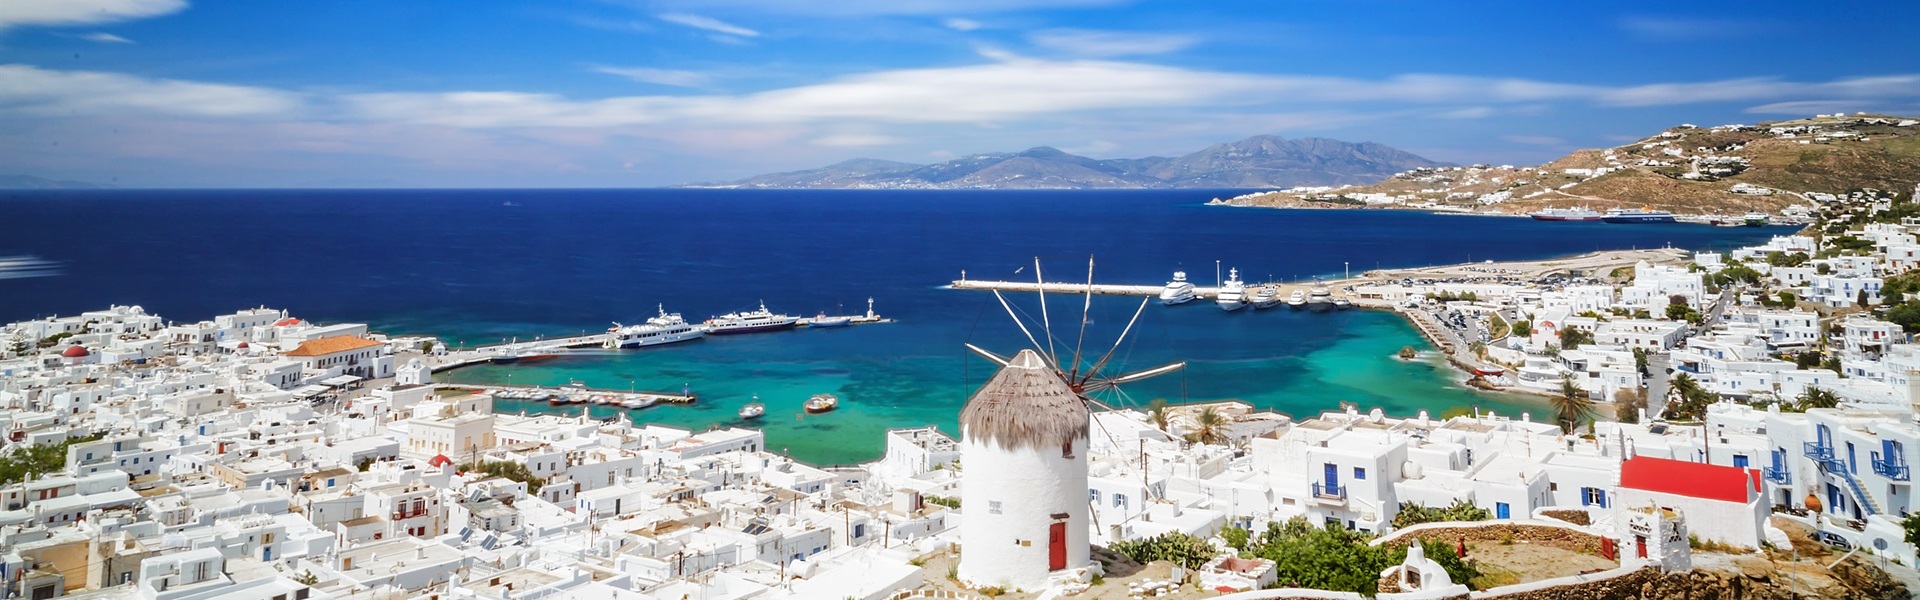 Best of Mykonos - Island and City Tour with Local Guide